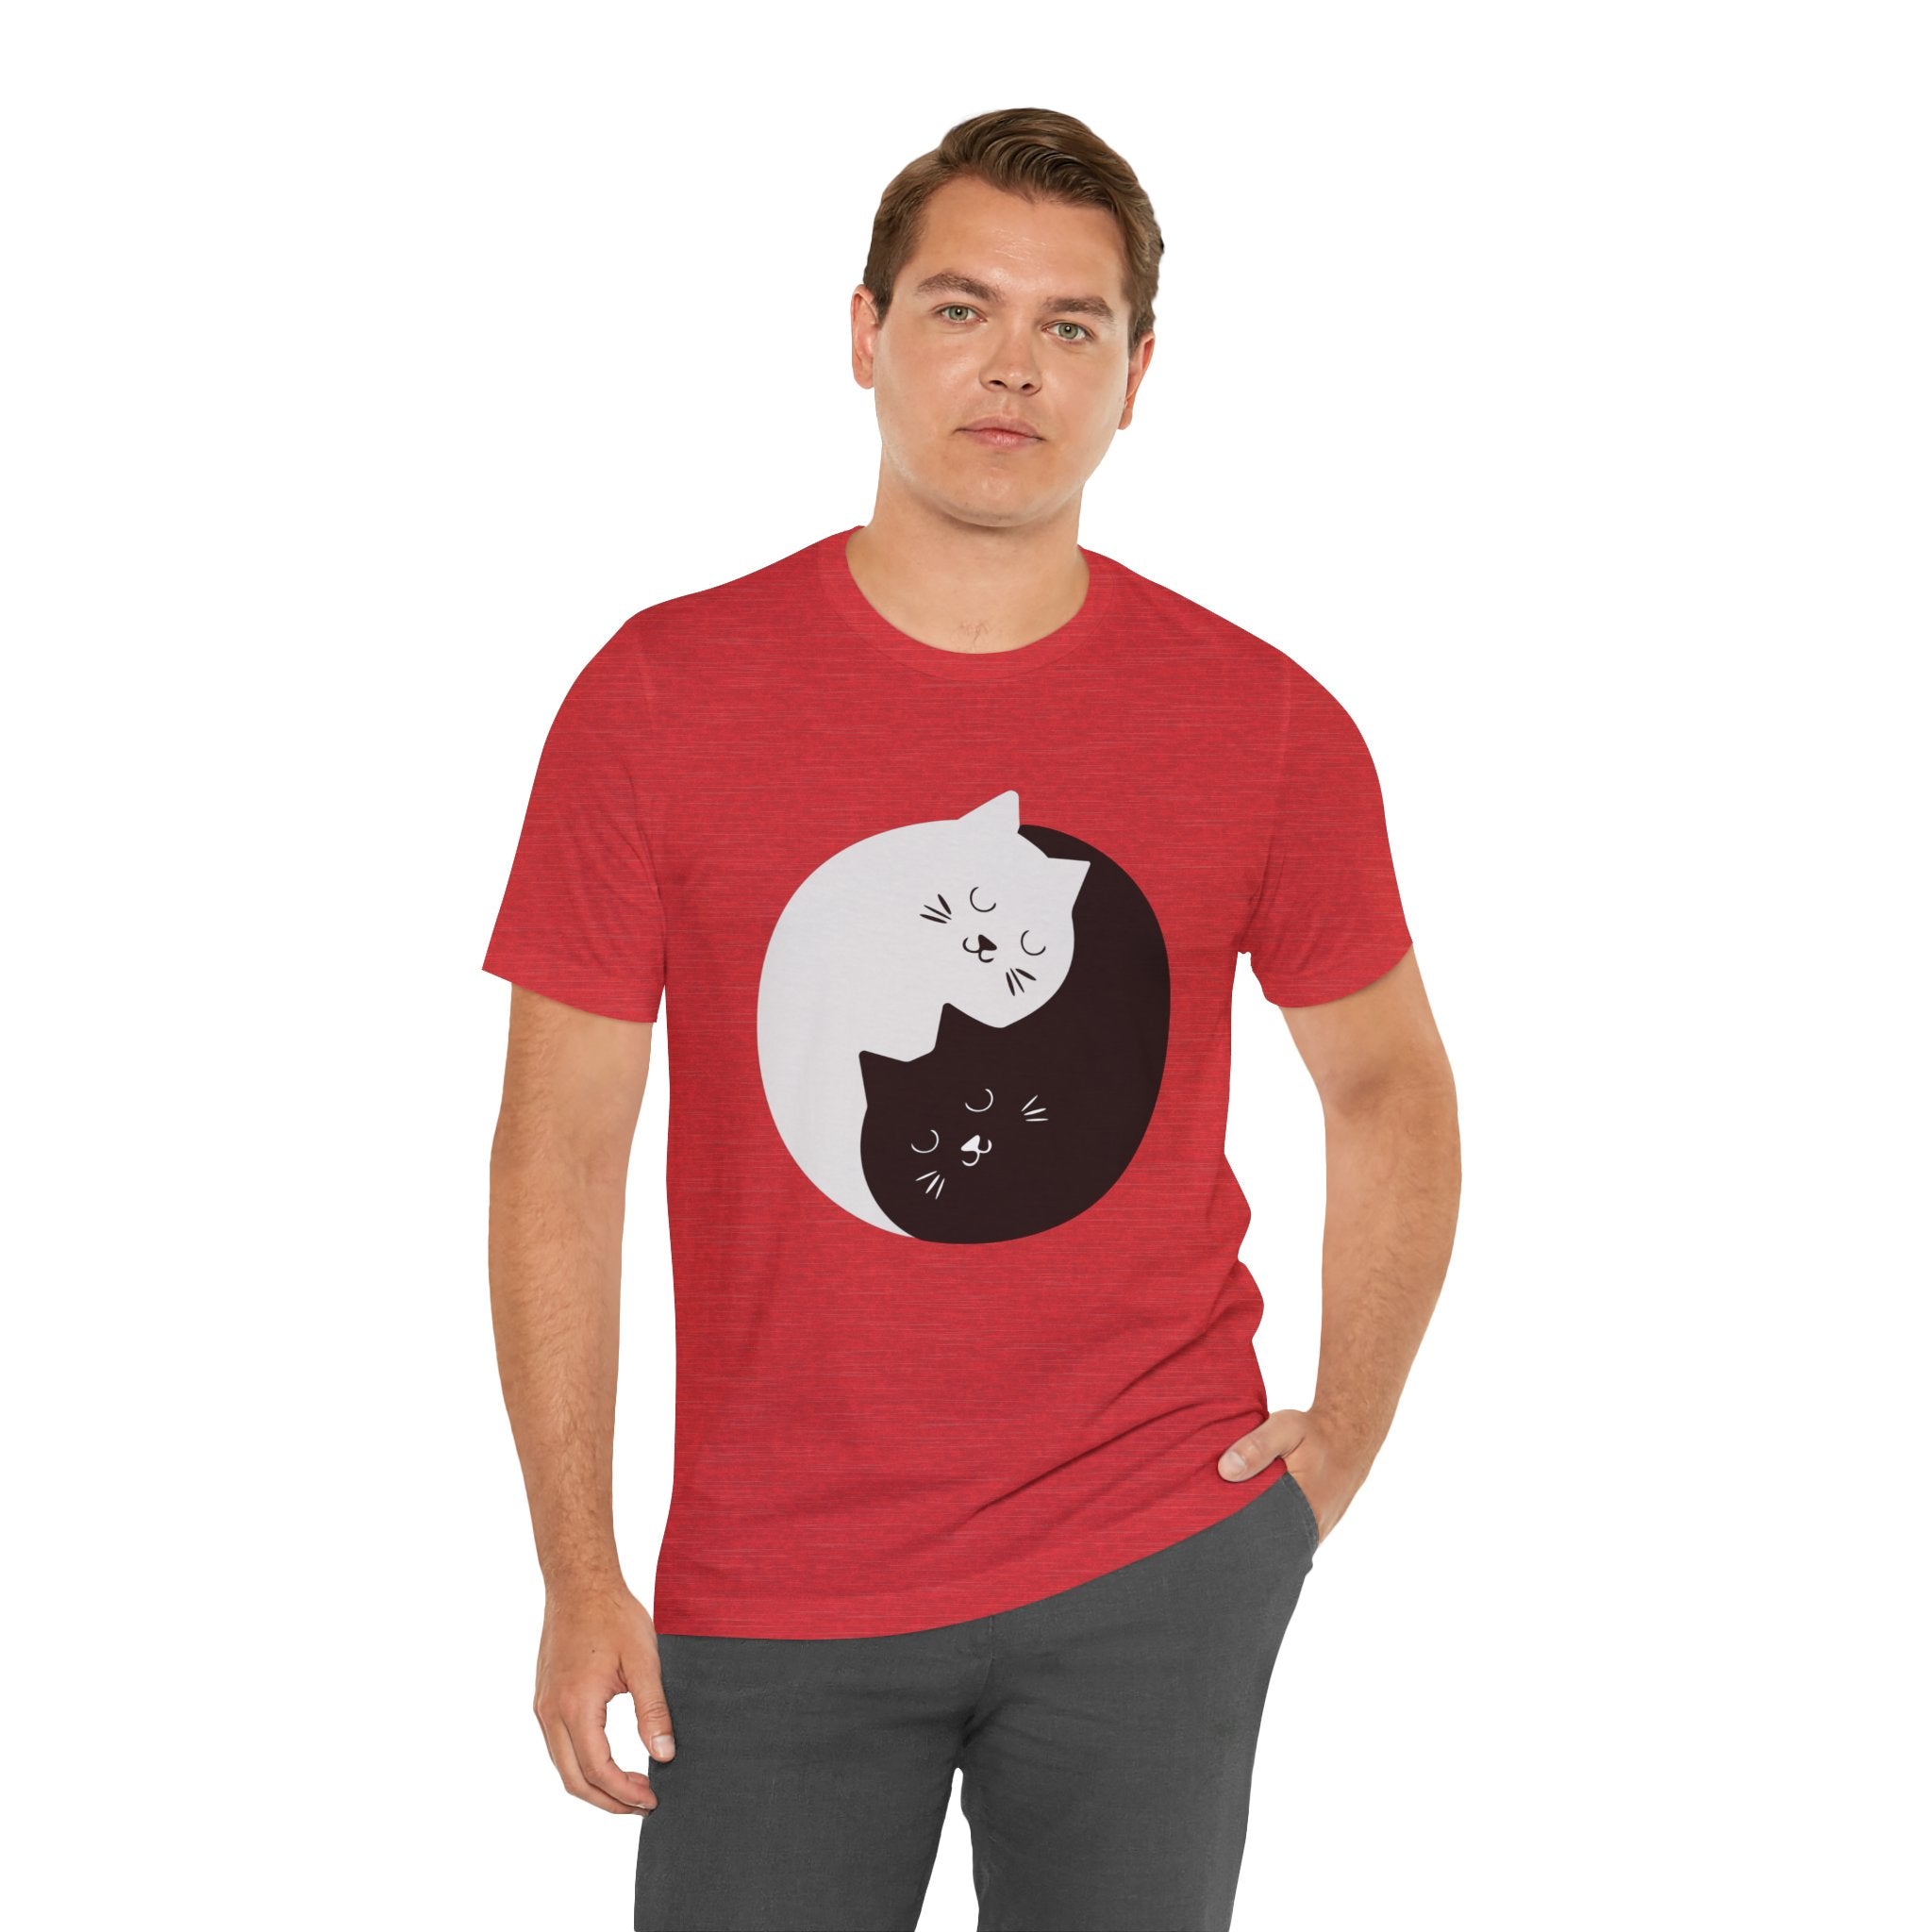 Man in red YING- ANG KITTIES T-Shirt featuring a graphic of Ying & Yang Kitties, standing against a plain background.